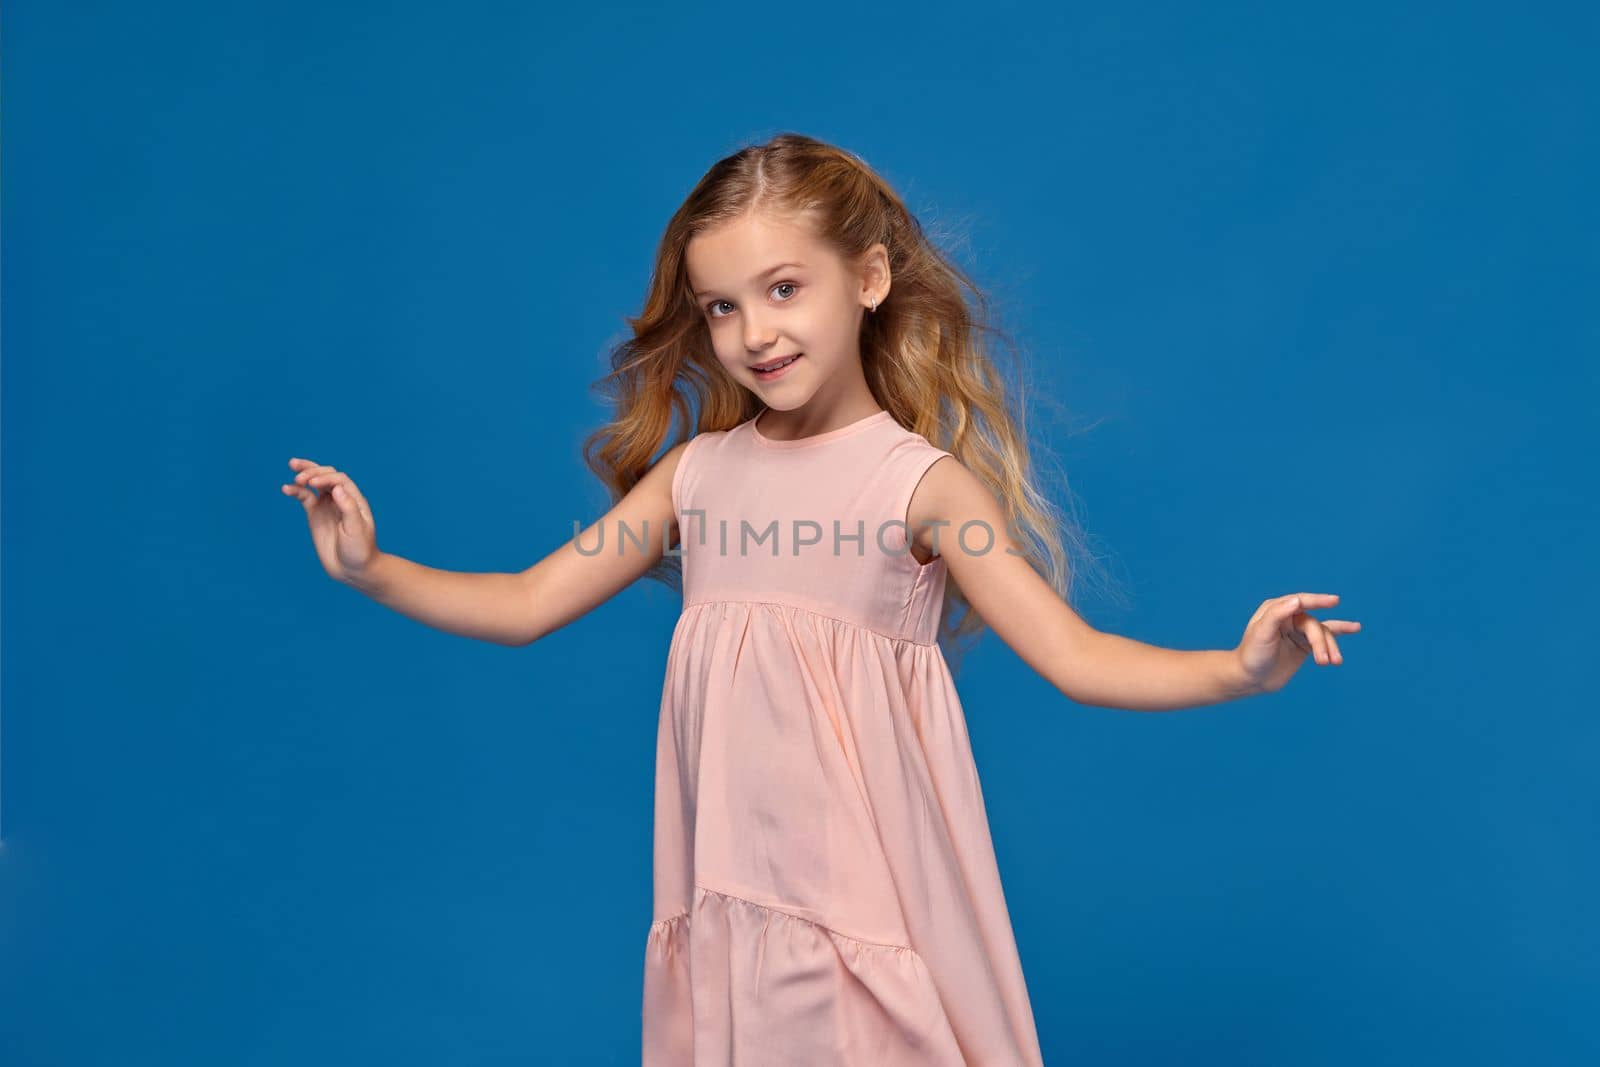 Fashionable little girl in a pink dress is dancing and looking happy, on a blue background.